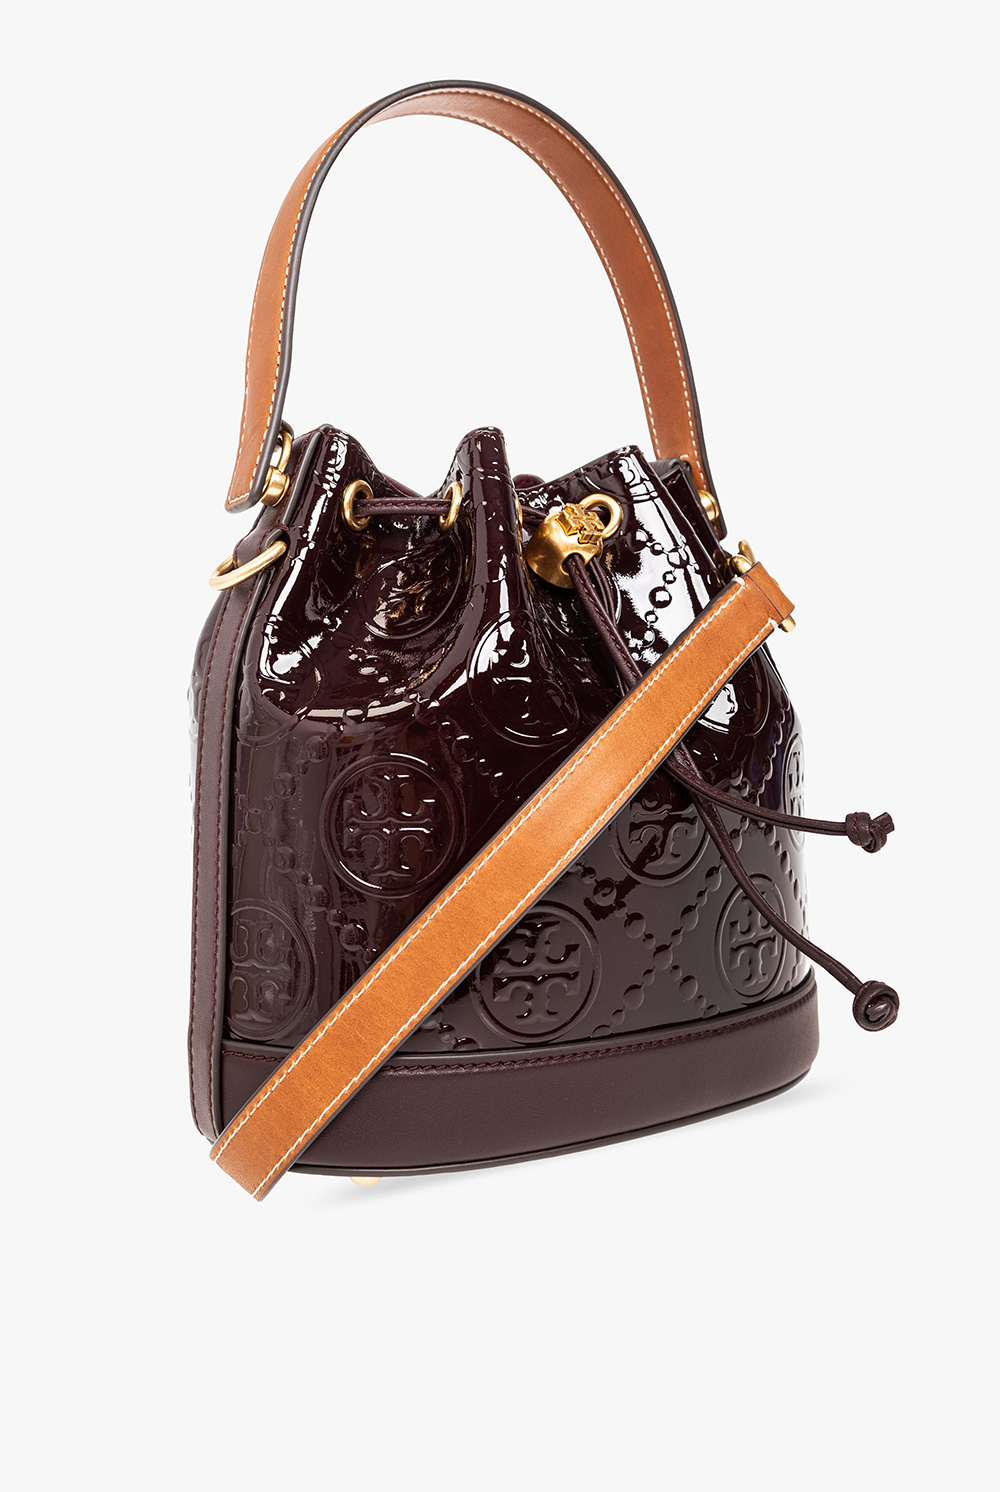 Tory Burch Bucket bag in patent leather | Women's Bags | Vitkac